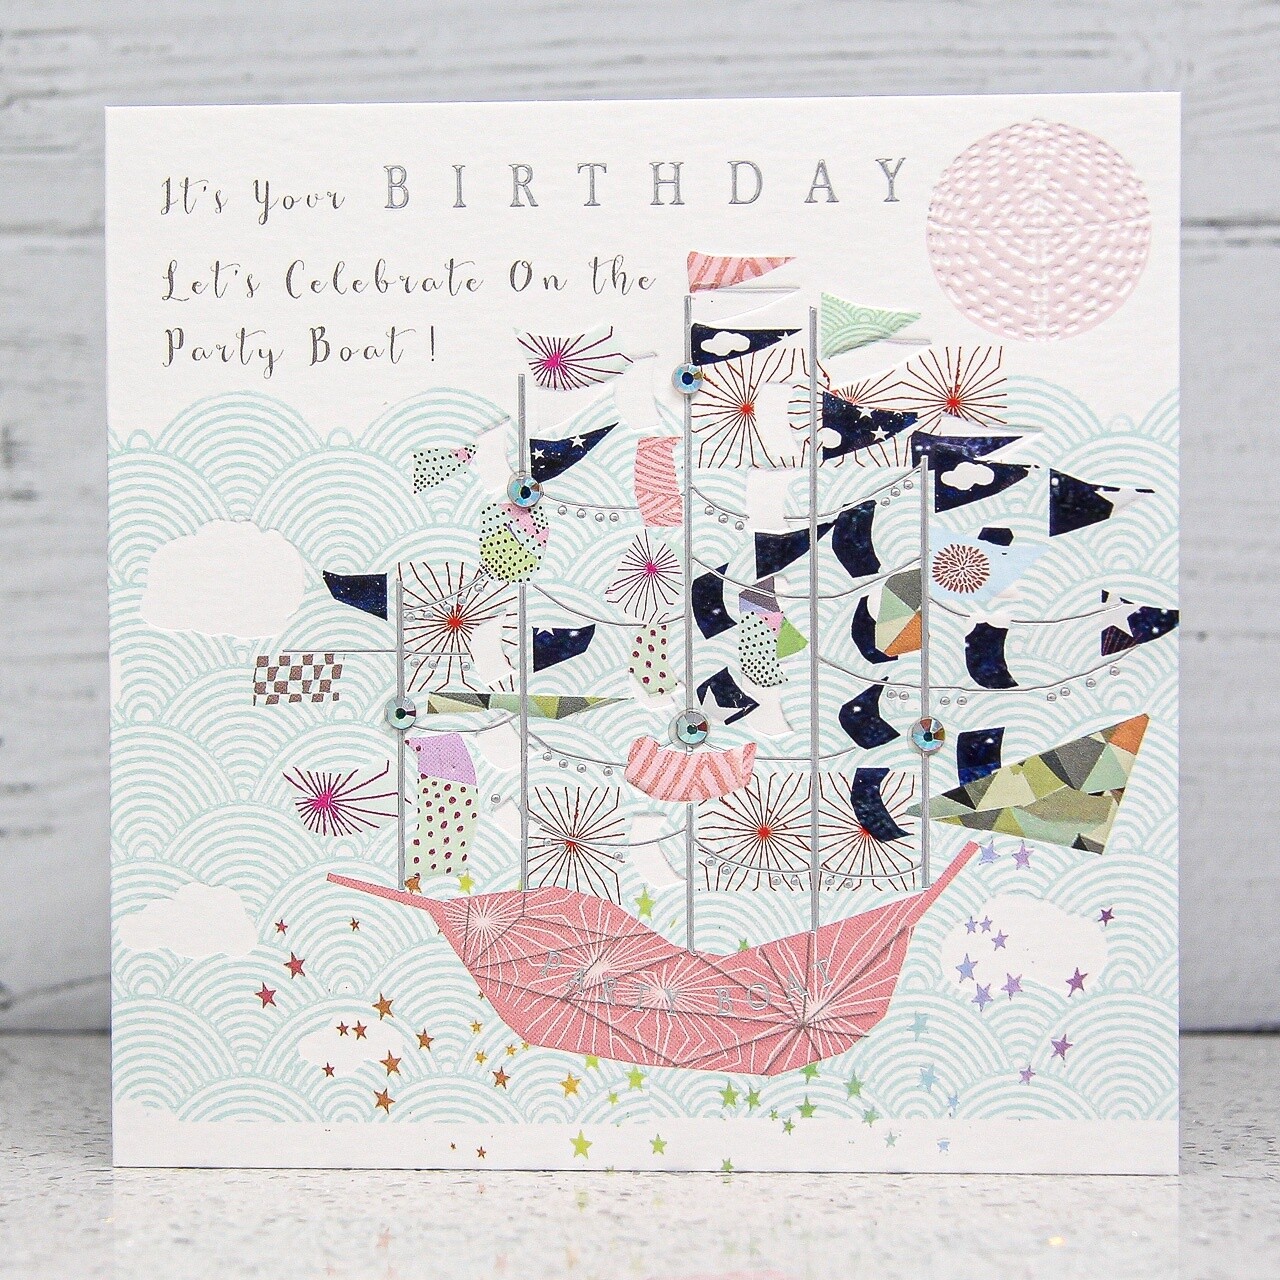 Party Boat Birthday Card by Sarah Curedale